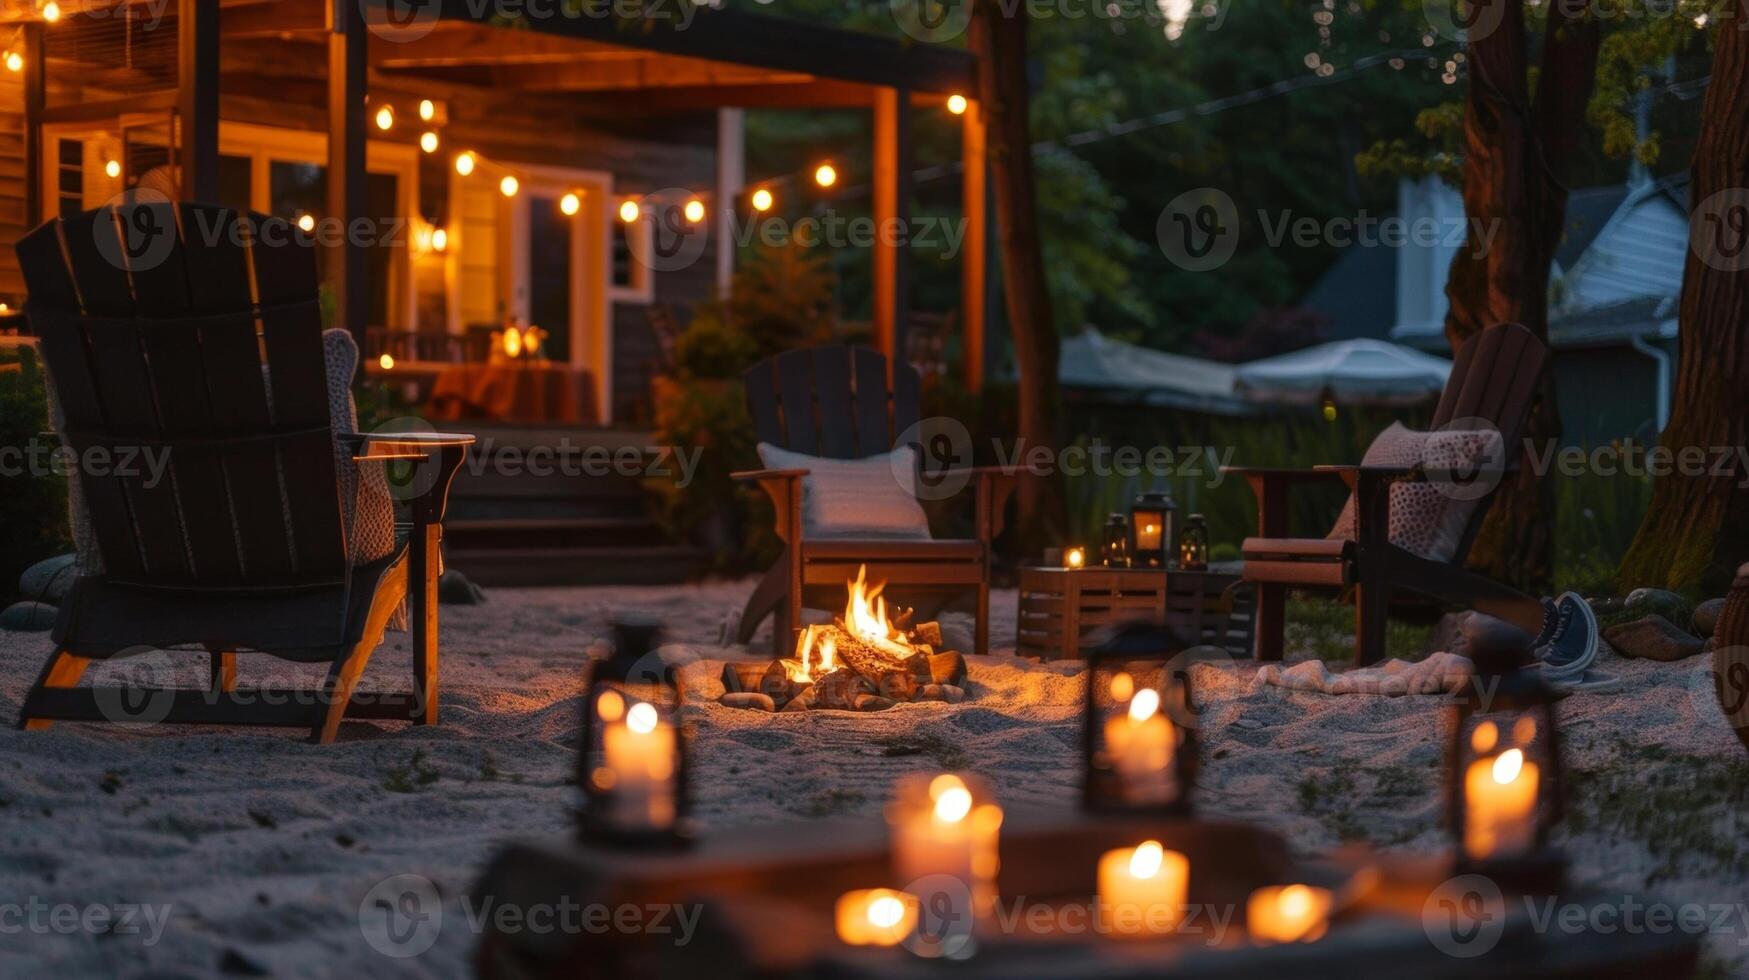 The soft glow of candles and the inviting warmth of the fire bring a cozy and intimate atmosphere to the outdoor movie experience. 2d flat cartoon photo